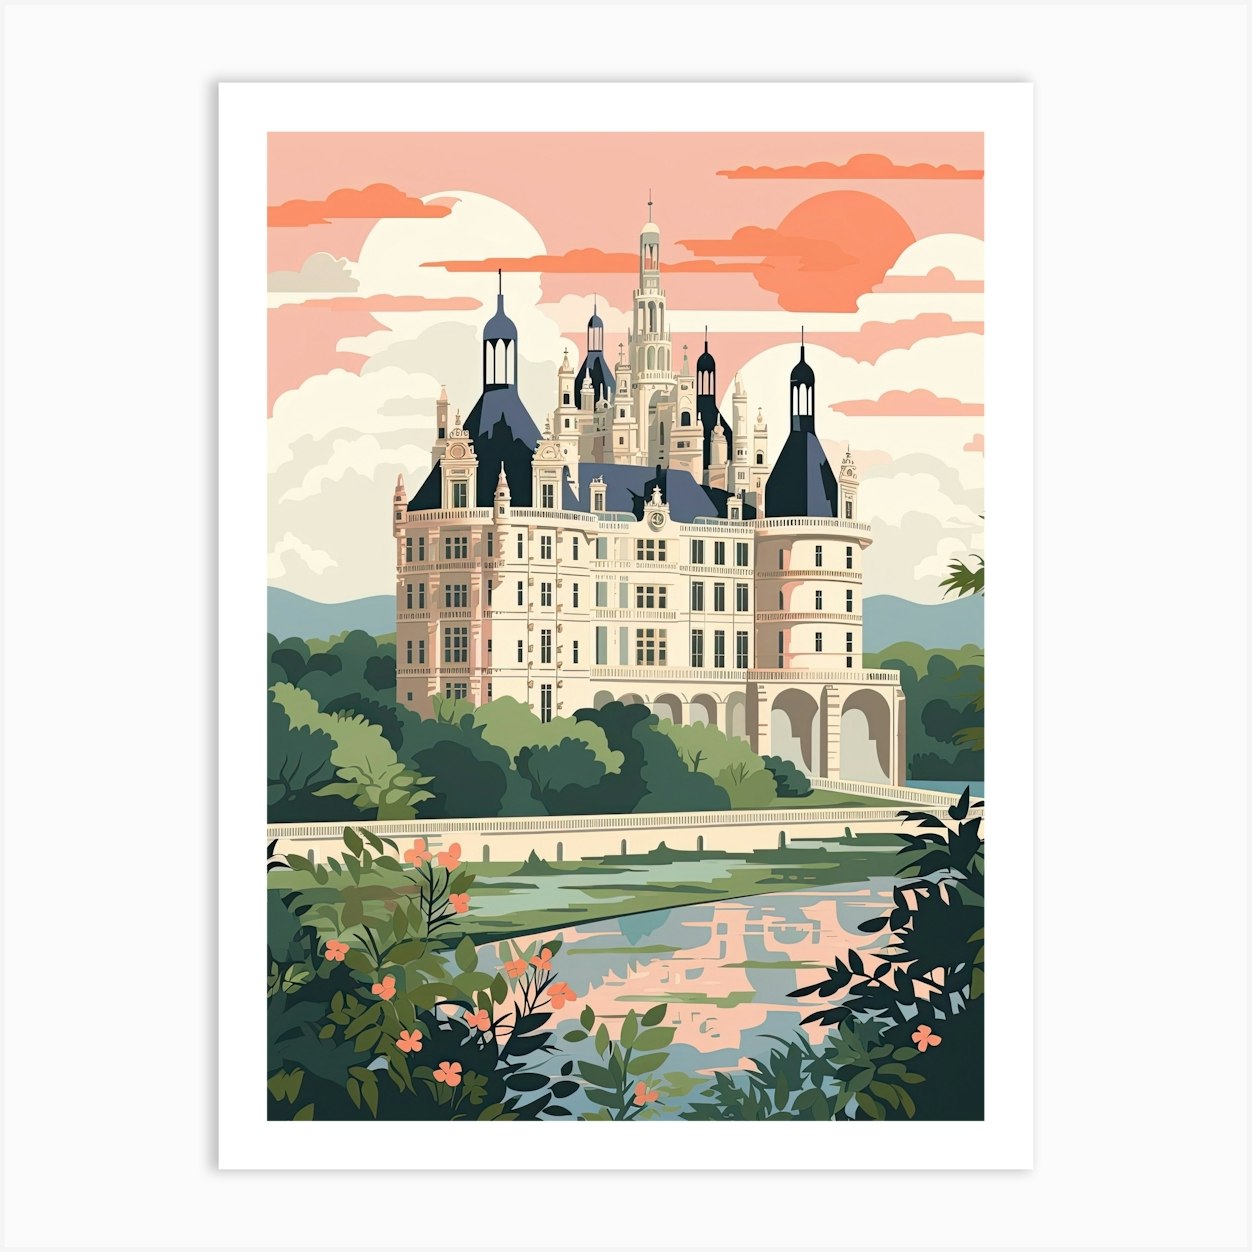 Chateau De Chambord Art Chambord, 3 Travel Cute Print Botanical France Poster Collection by Fy Illustration Travel 